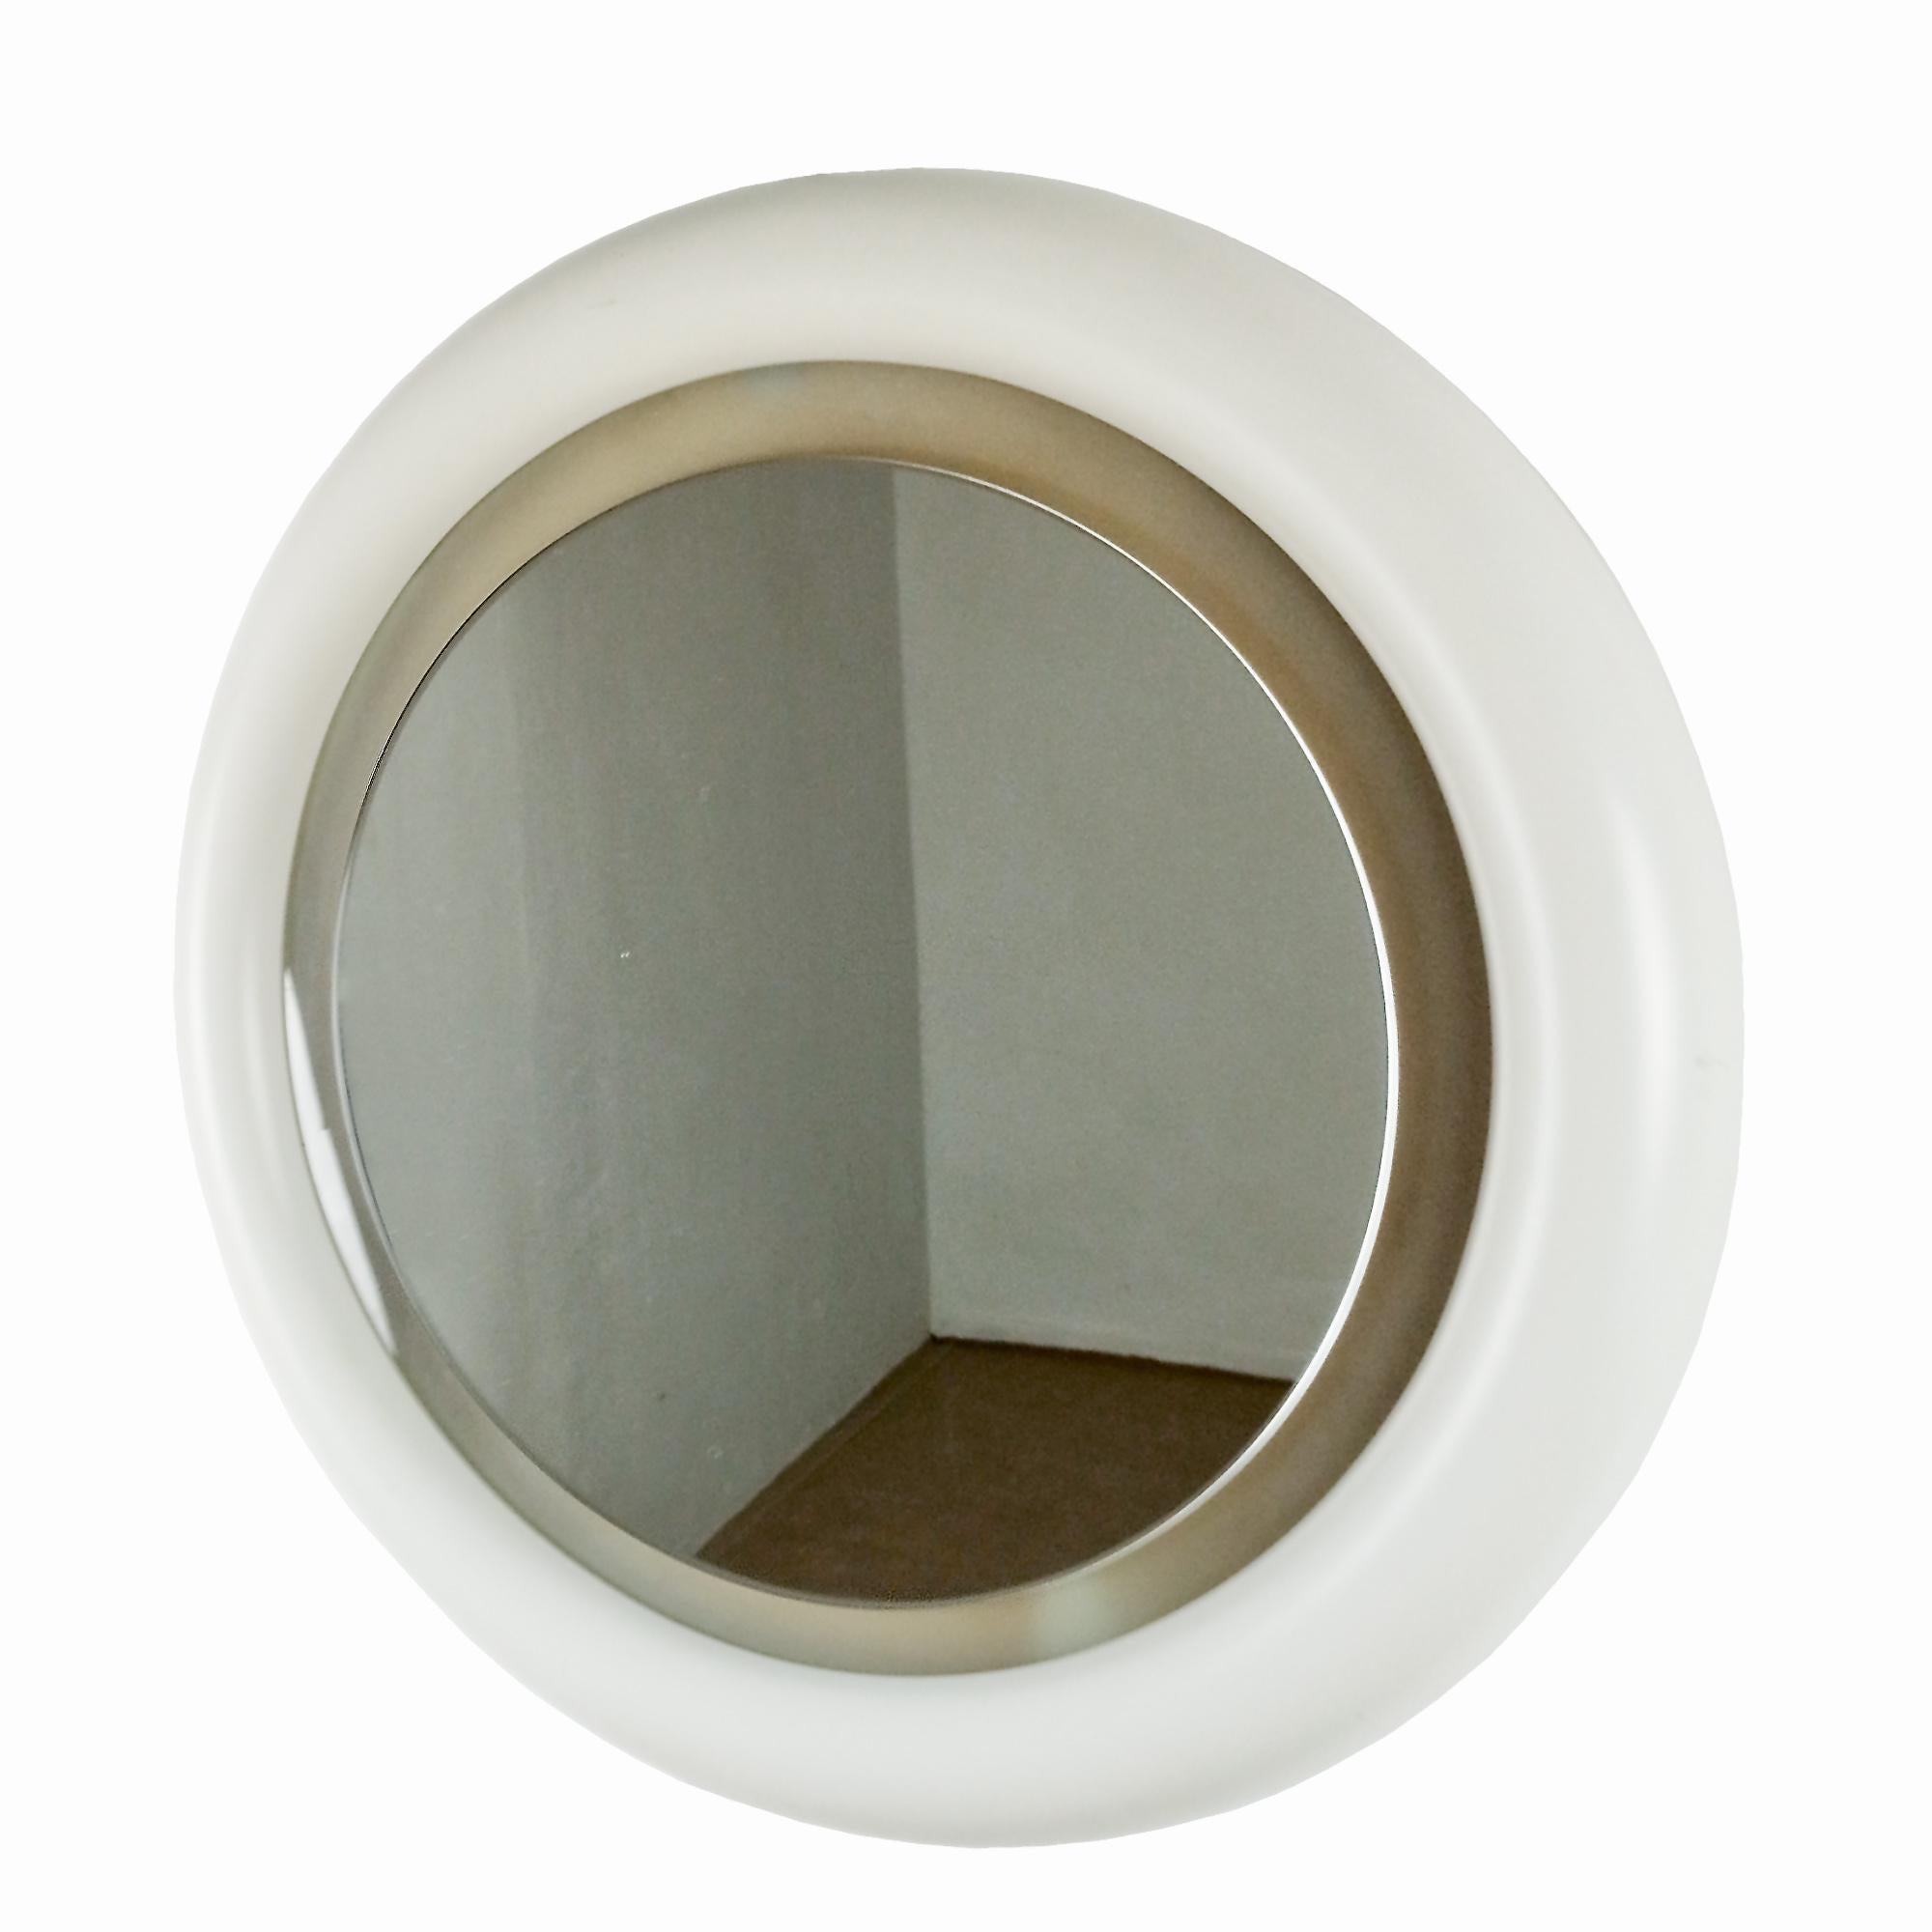 Round backlit mirror in white lacquered wood with sandblasted glass diffuser.

Italy c. 1970.